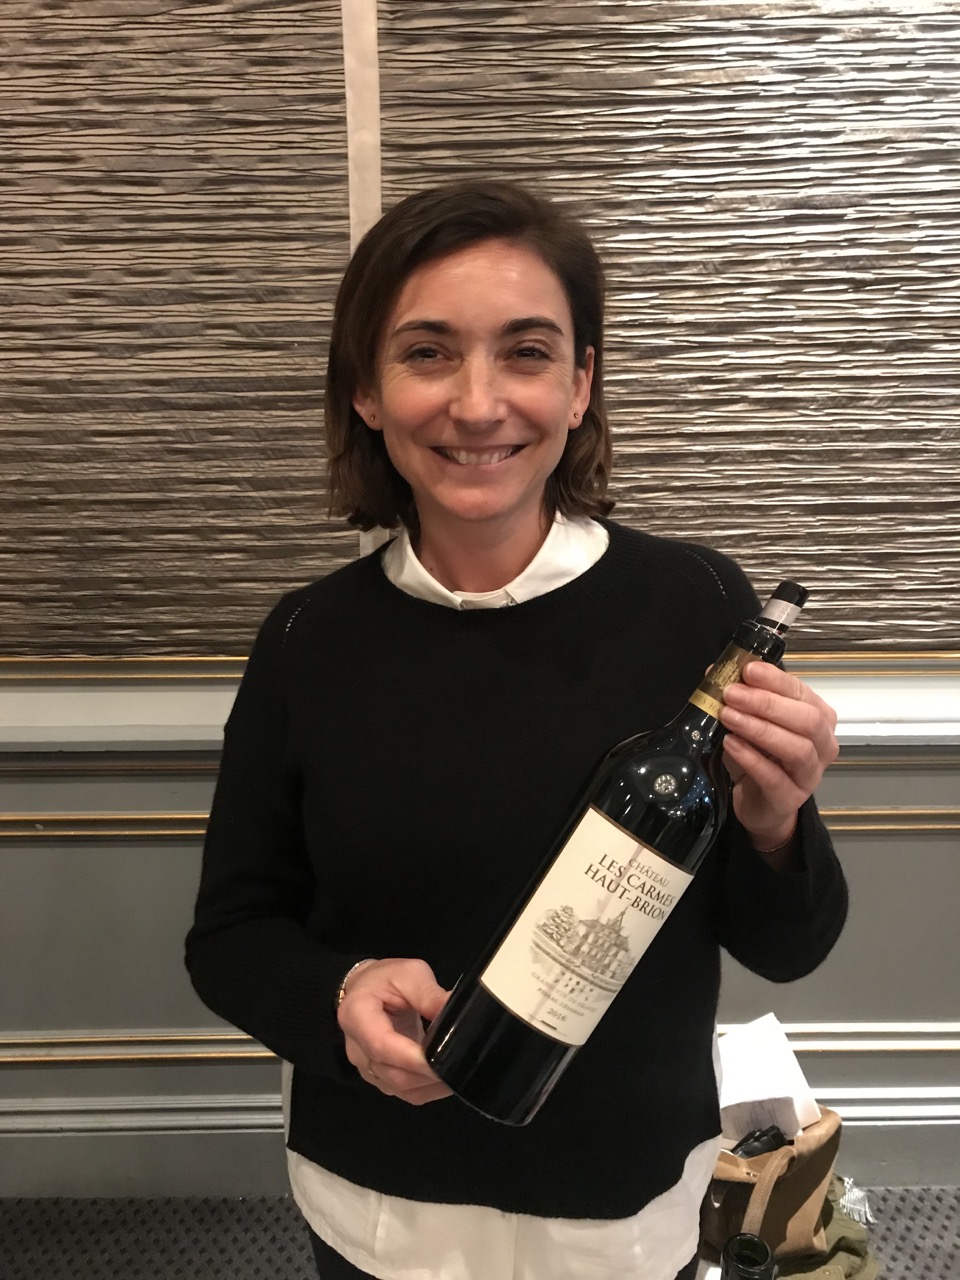 Pessac-Léognan and Chronicles Graves from bottle | Wine 2016